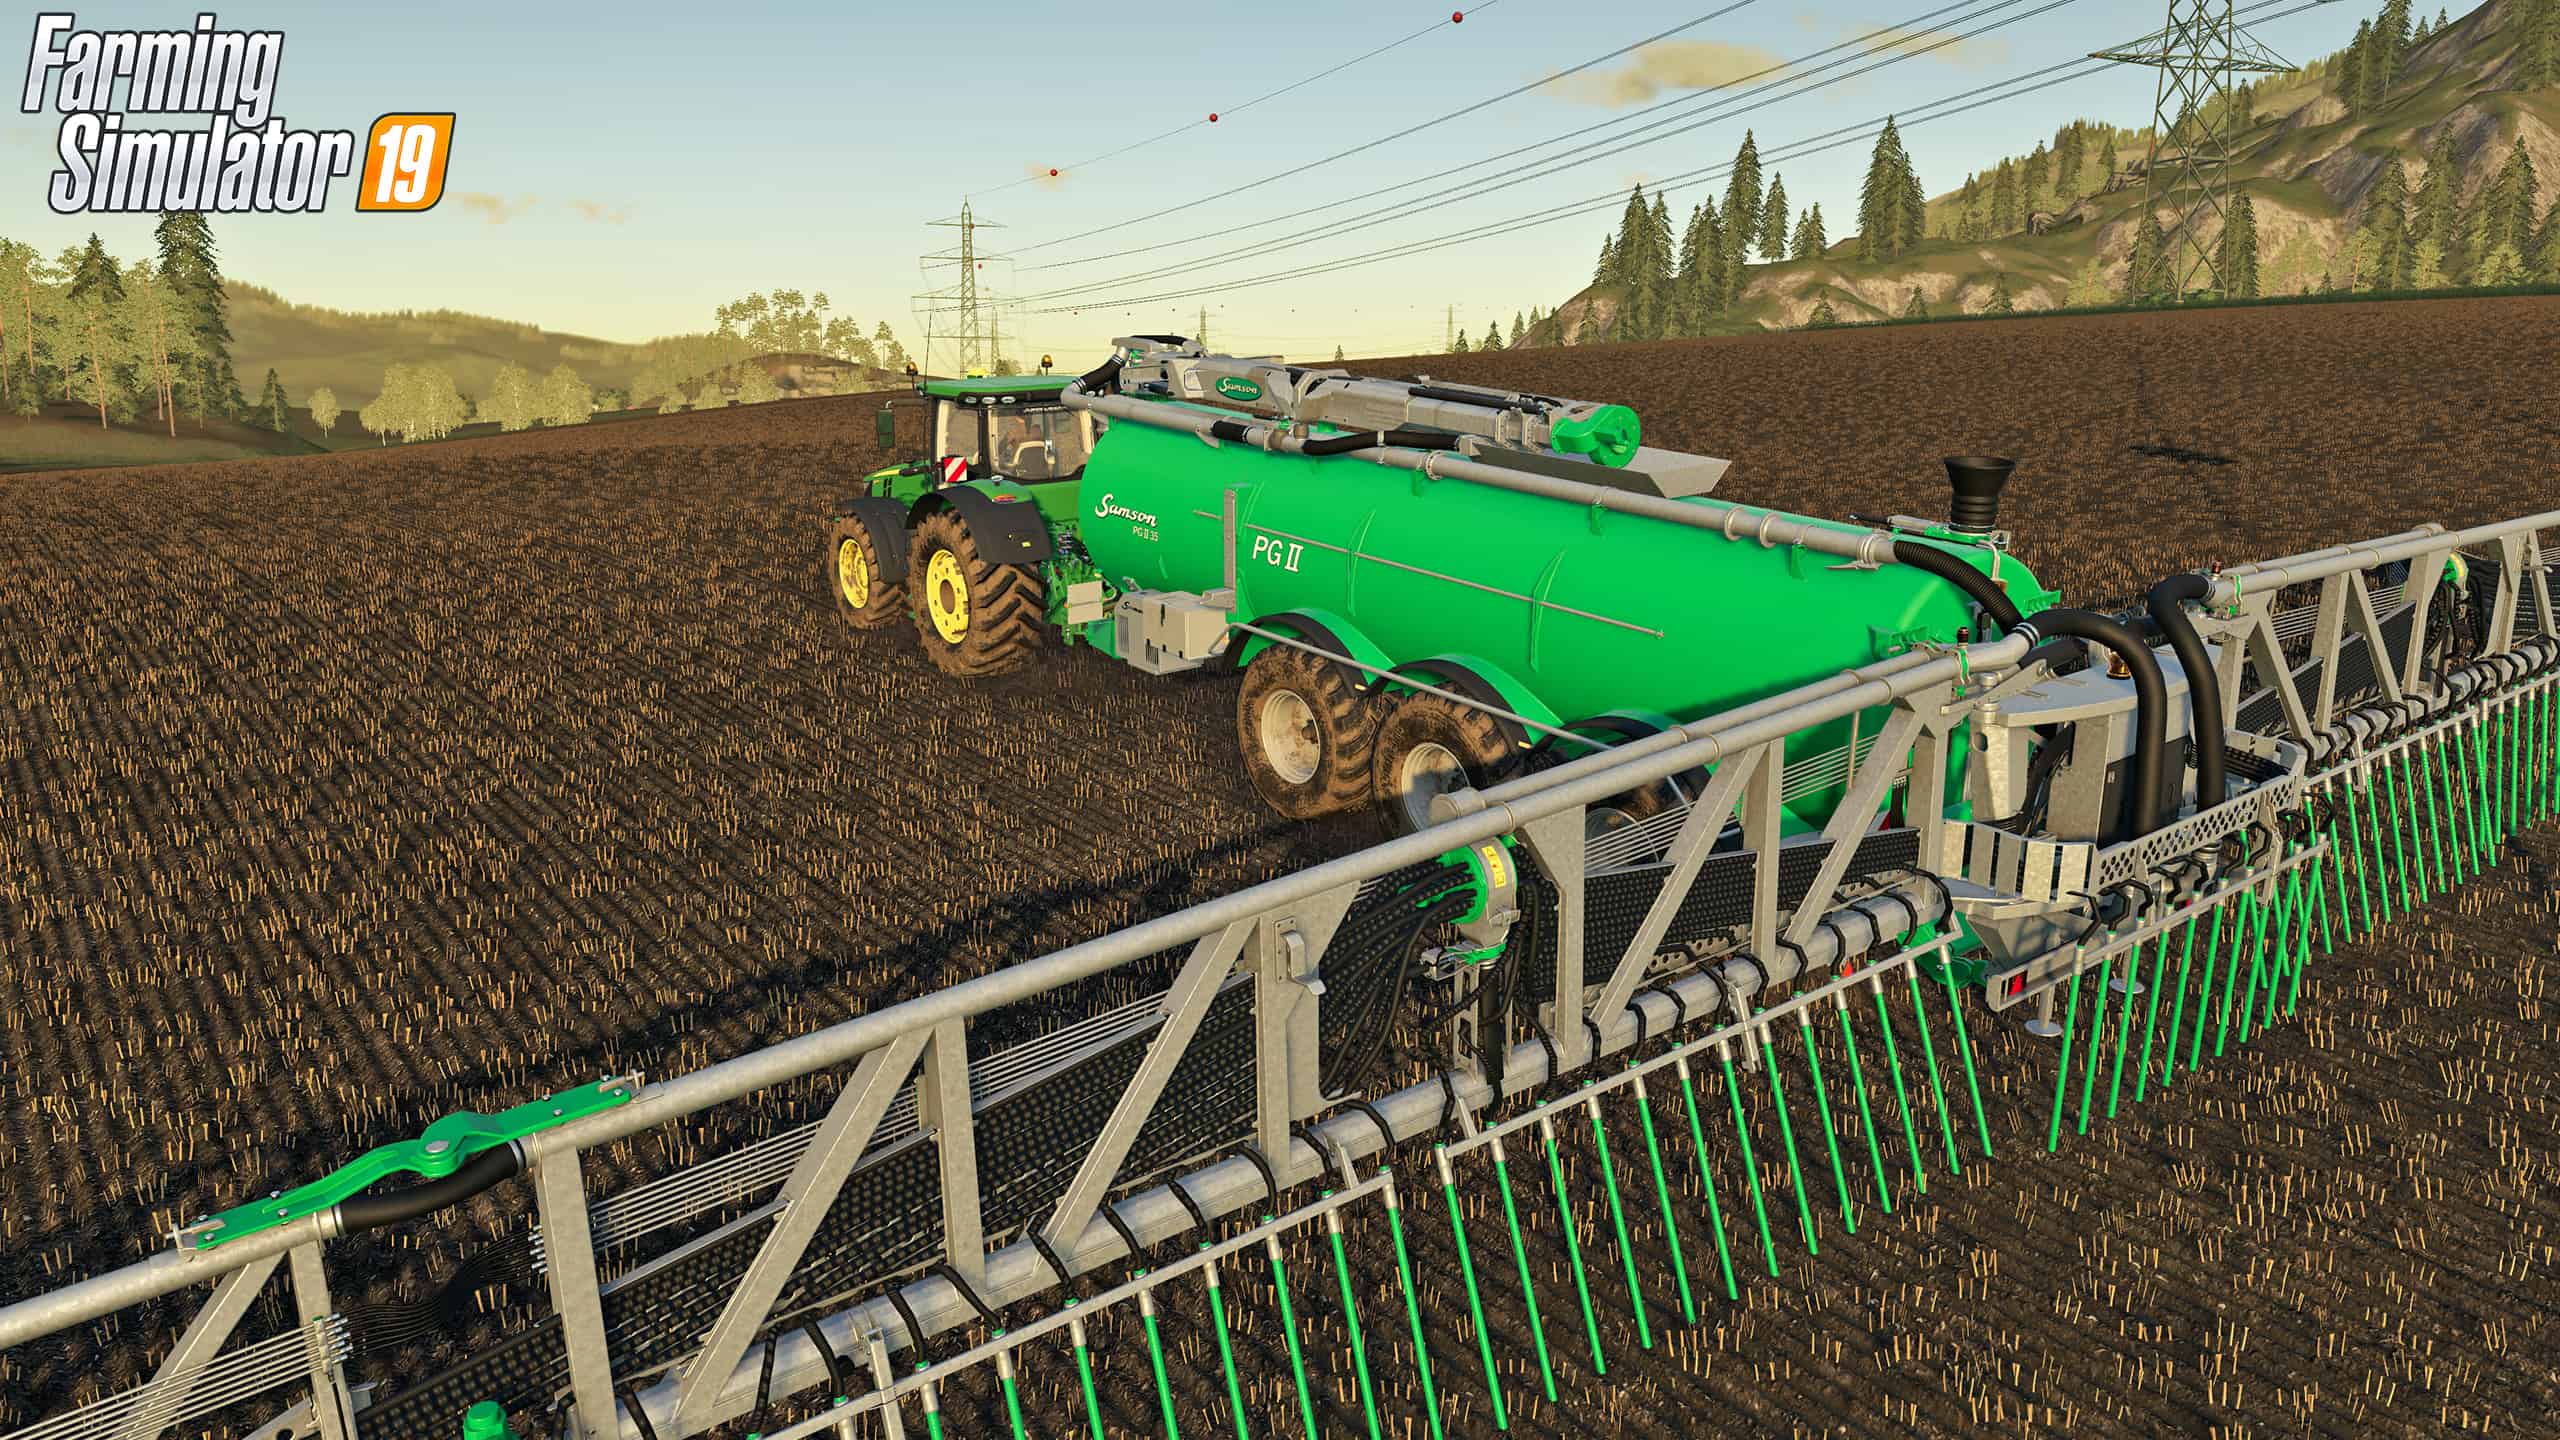 Samson machines are for the first time officially included in Farming Simulator